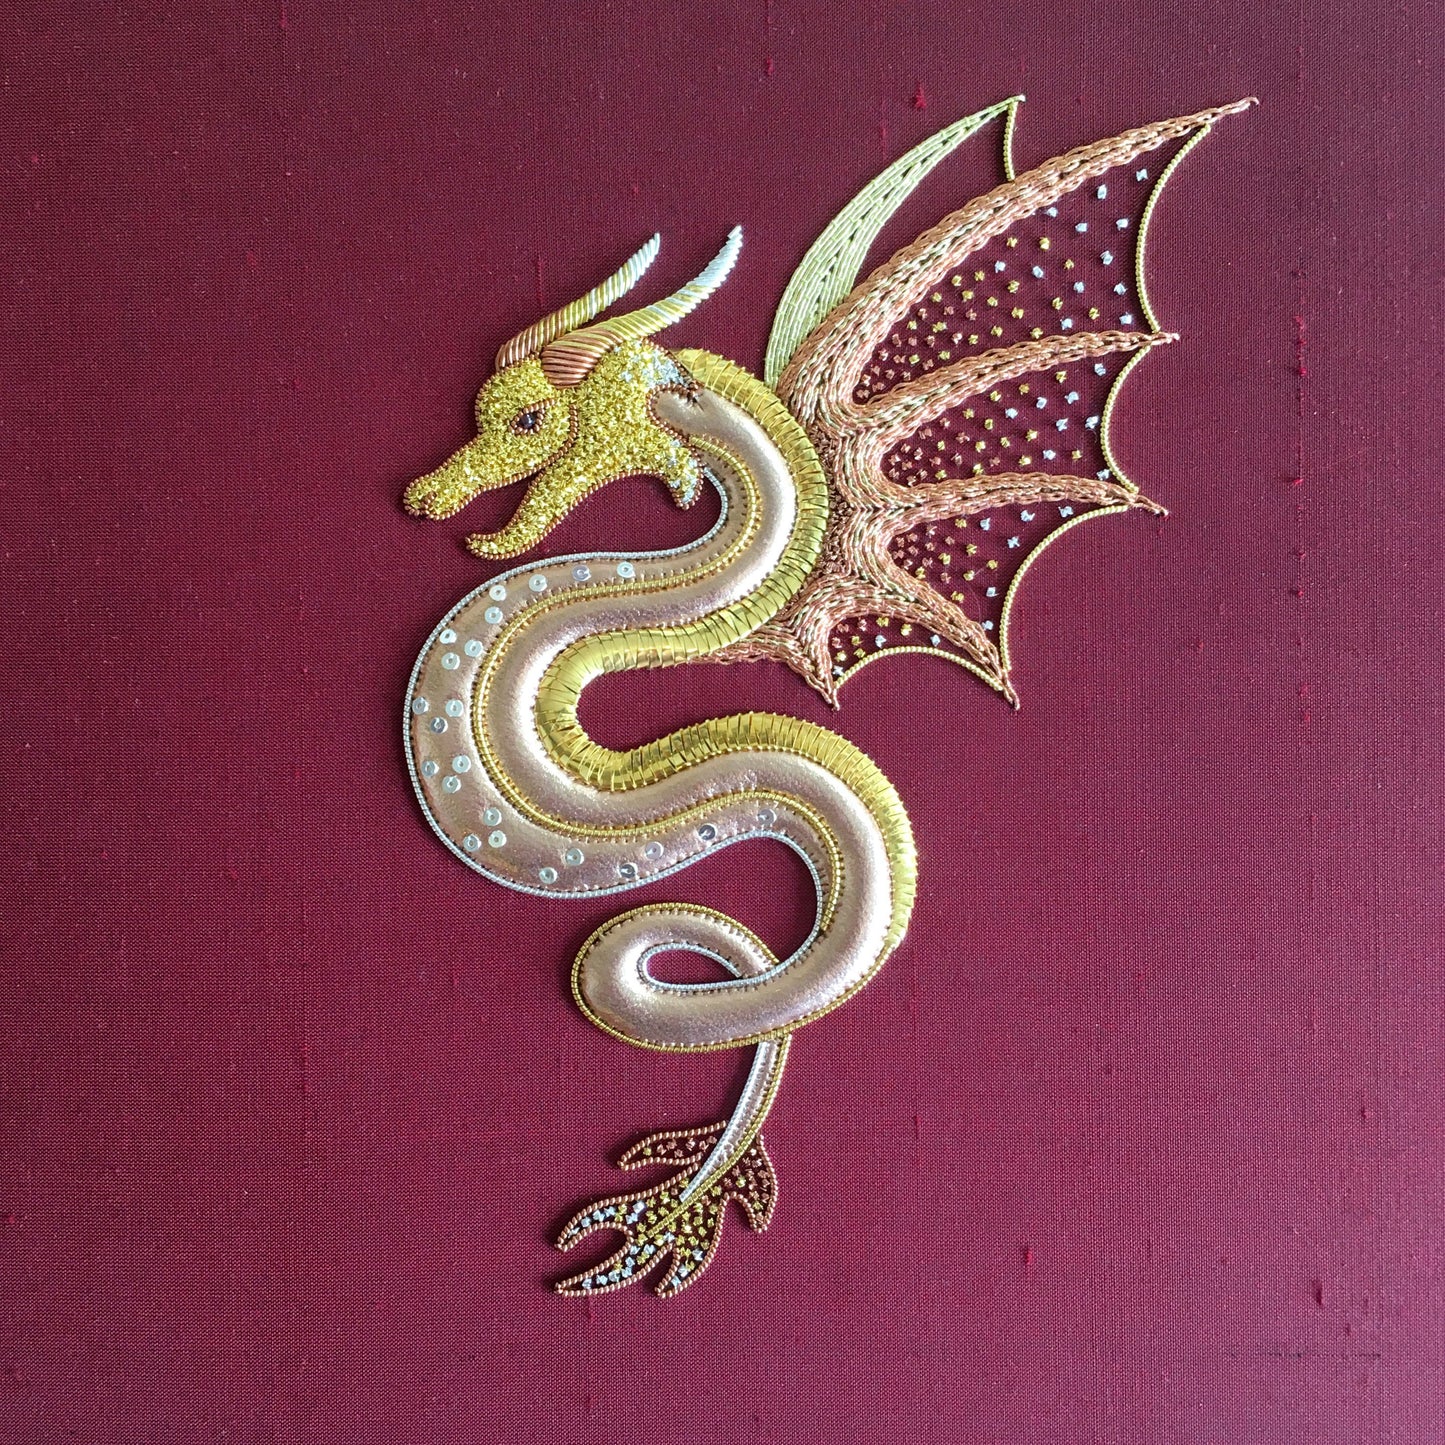 'Wyvern' Goldwork Embroidery Kit Materials Pack